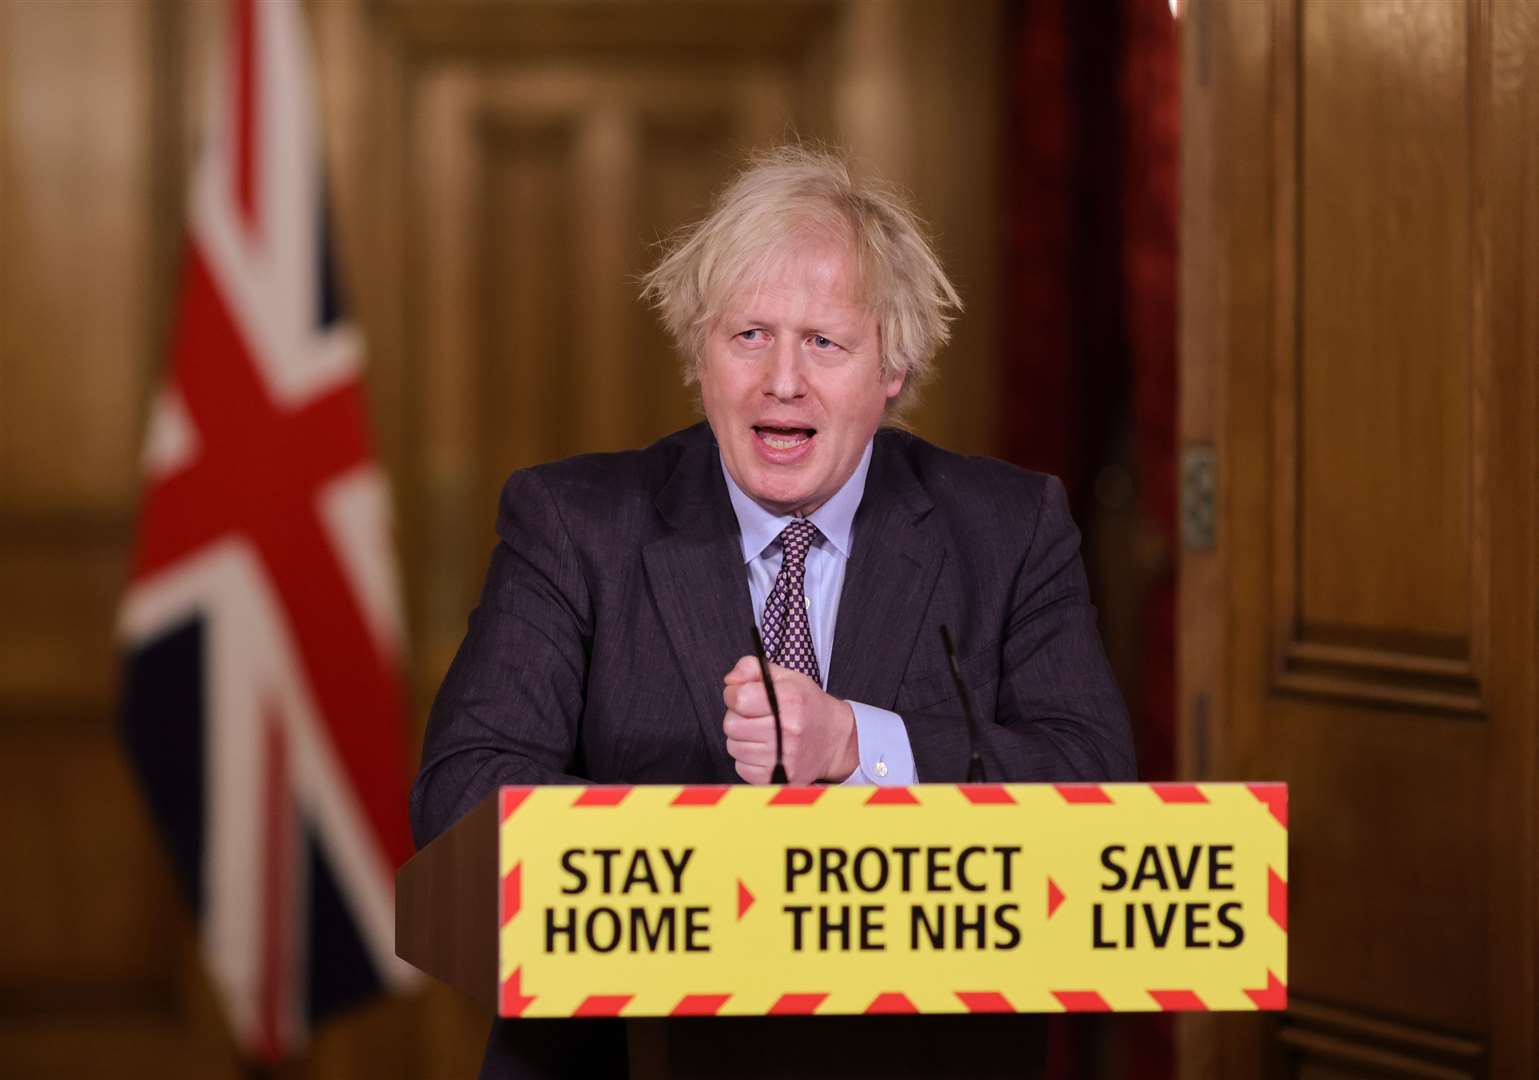 Boris Johnston pictured during one of the many Covid briefings.